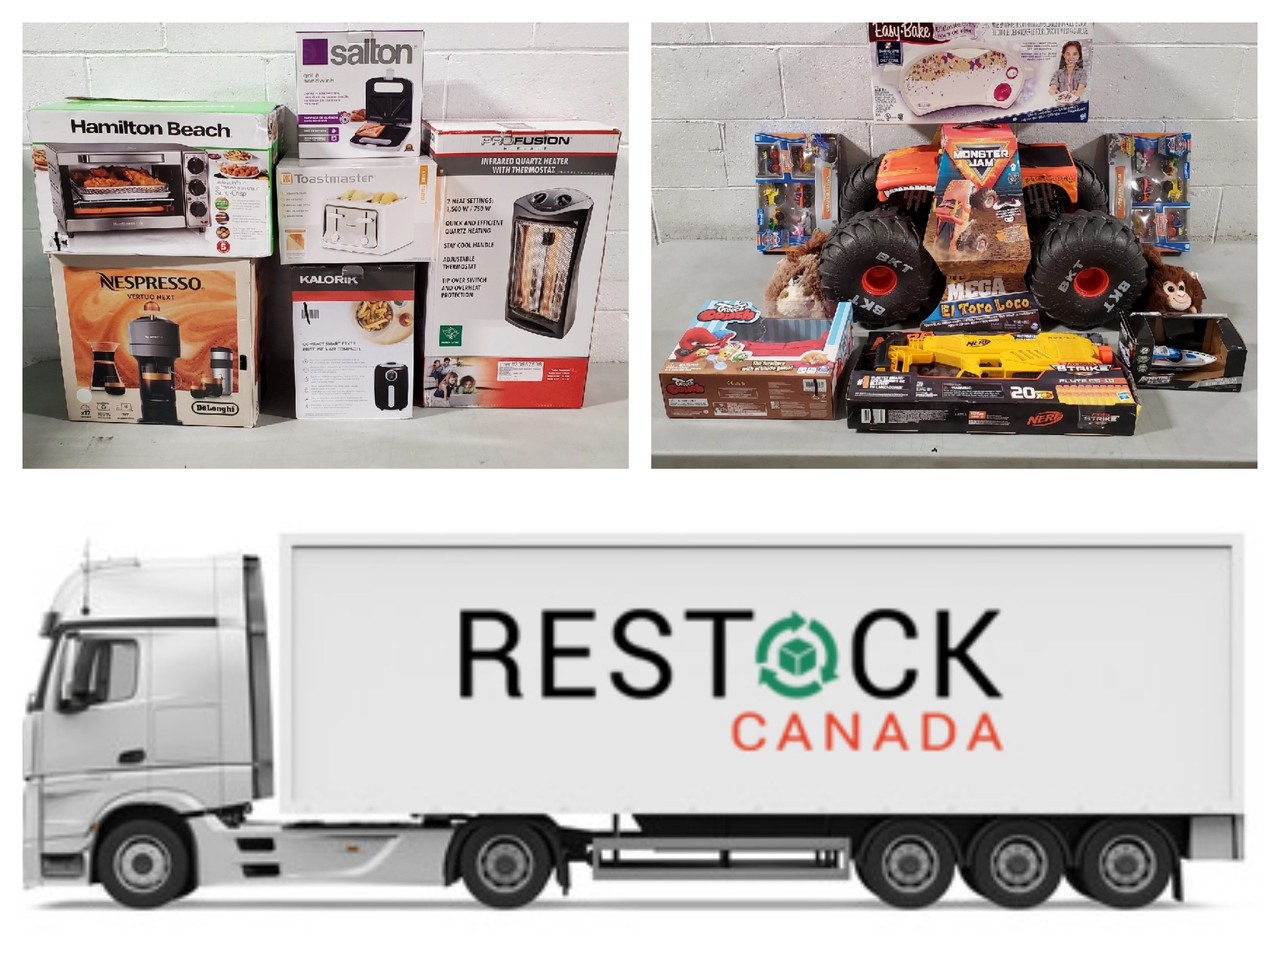 2821 Units of Home Products MSRP $51,888 Returns (Lot TK618601)  Restock Canada